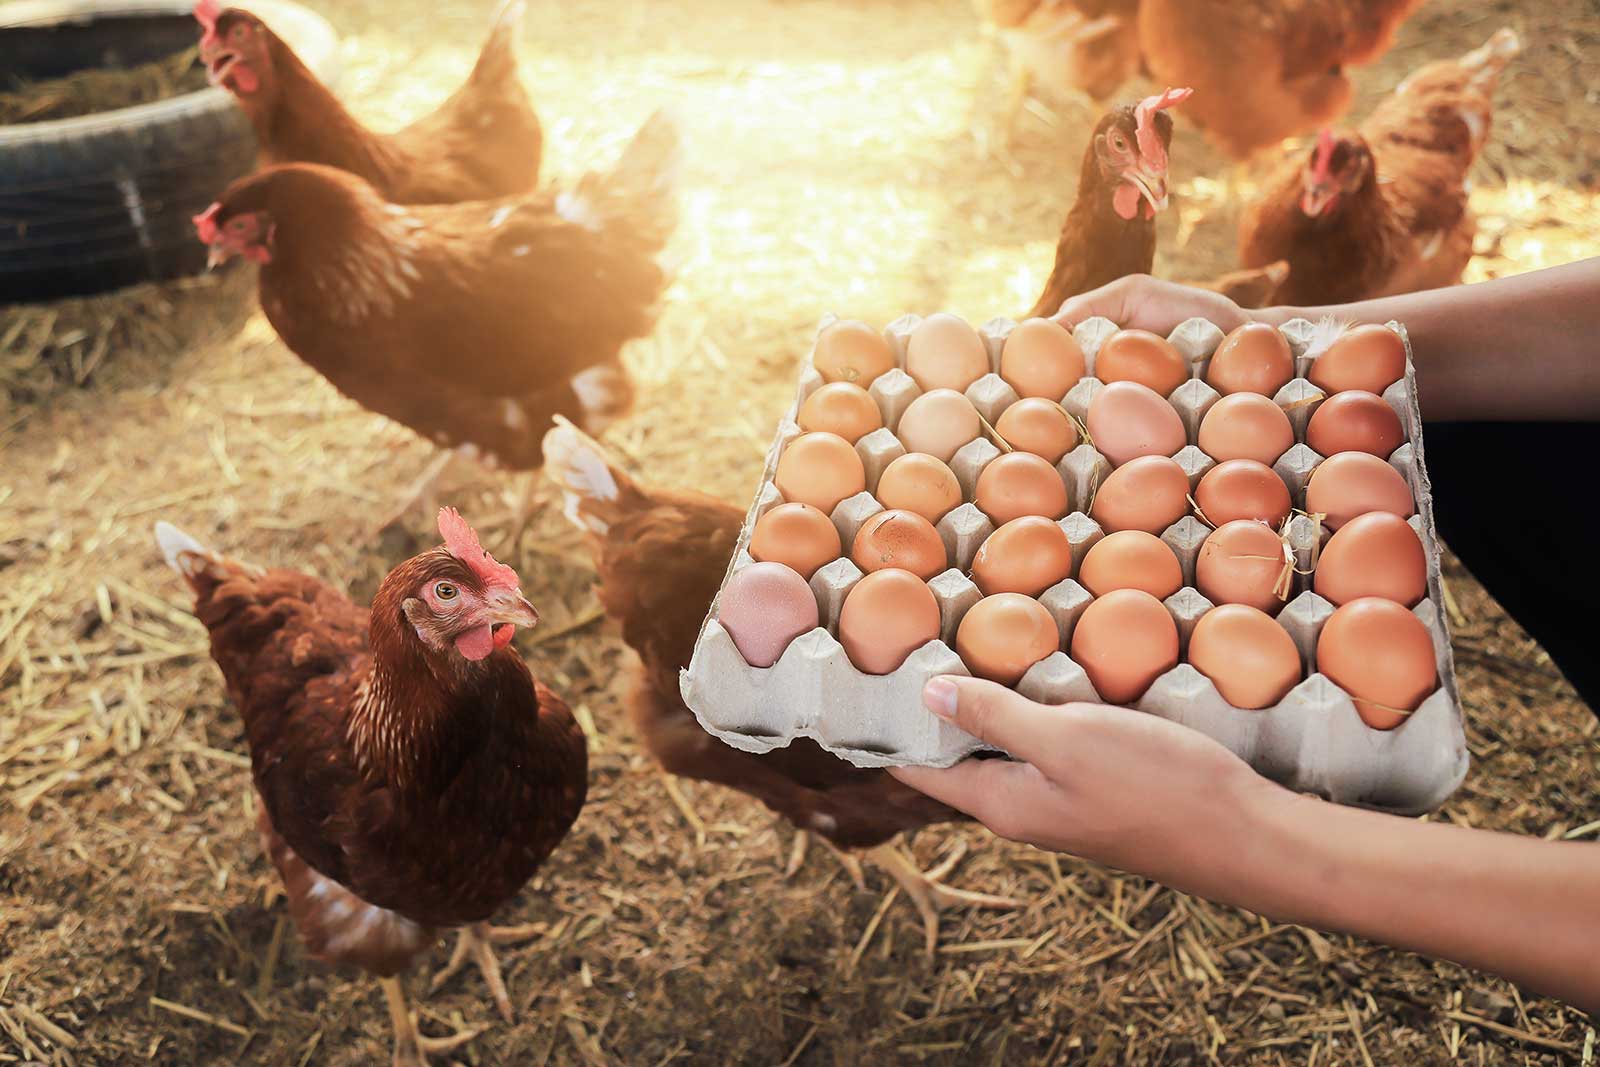 Chickens with eggs in a styrofoam container